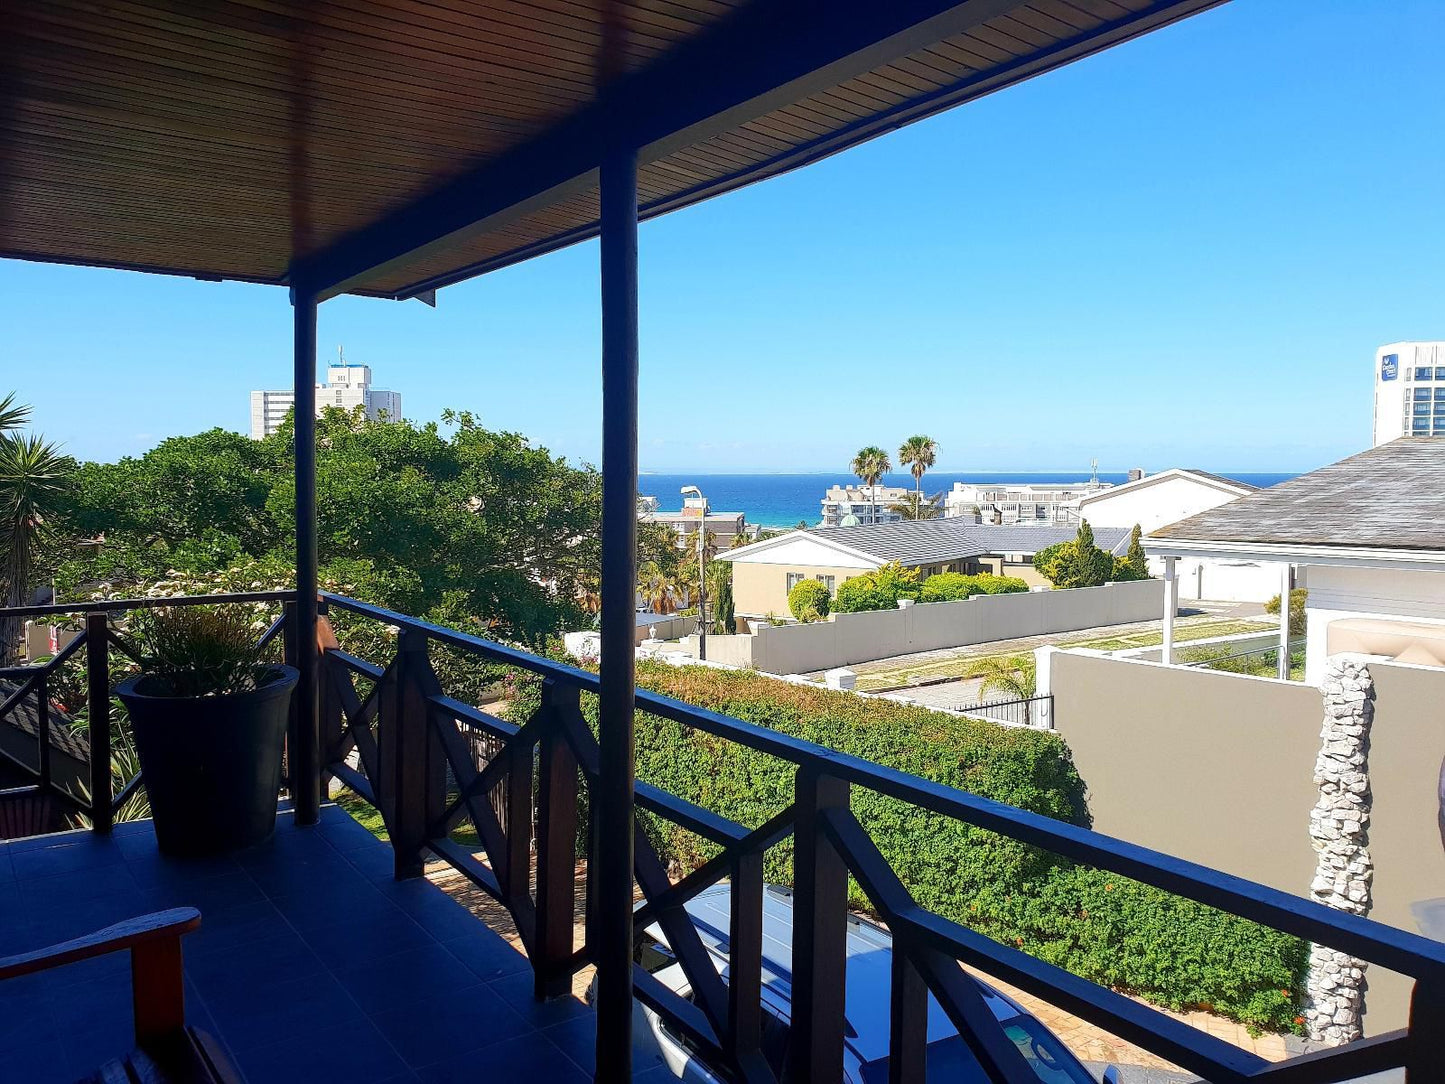 Lungile Backpackers Humewood Port Elizabeth Eastern Cape South Africa Balcony, Architecture, Beach, Nature, Sand, Palm Tree, Plant, Wood, Framing